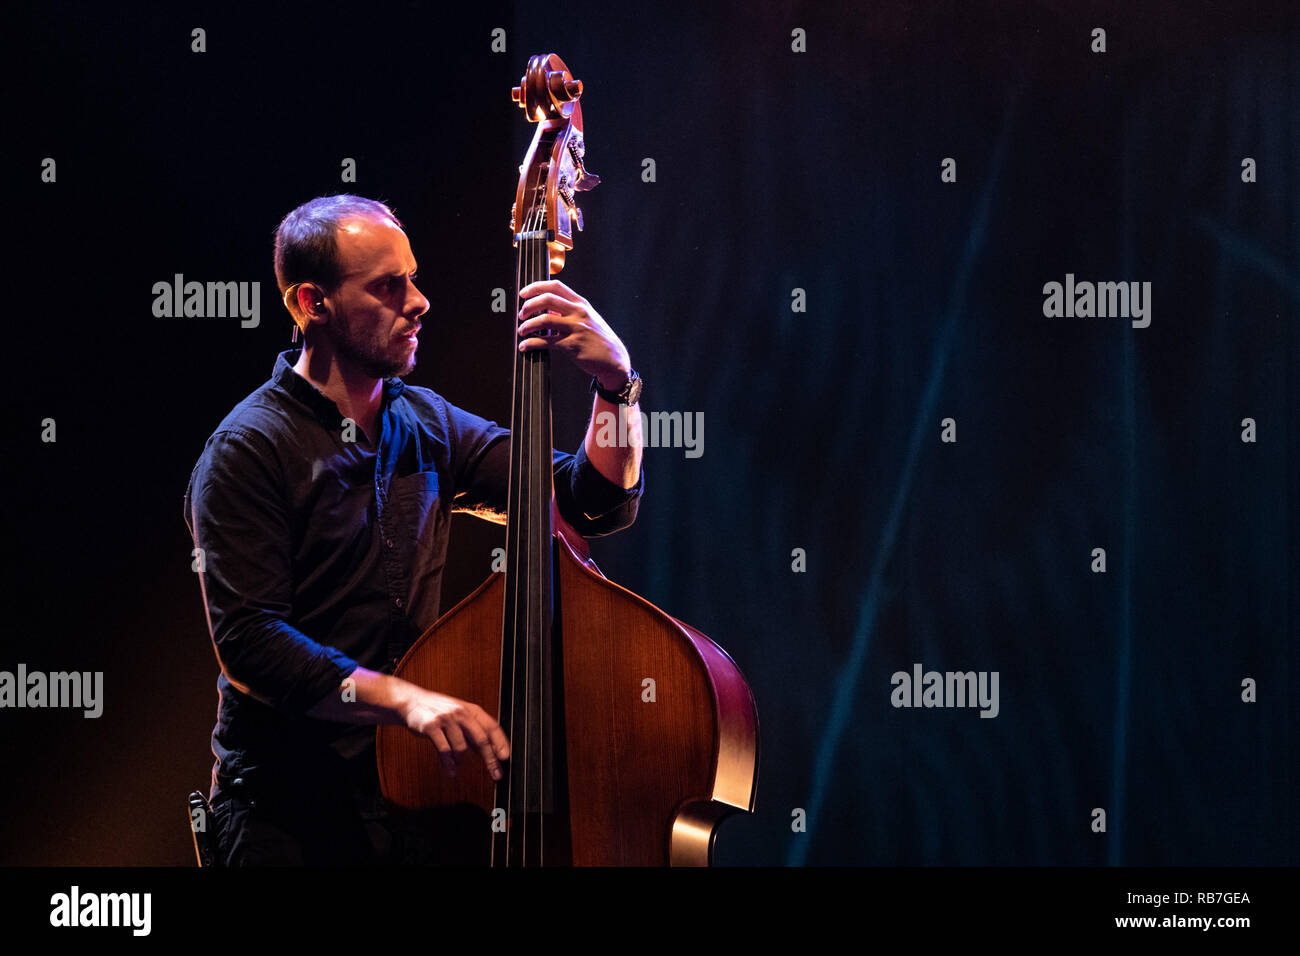 Musician playing upright double bass Stock Photo